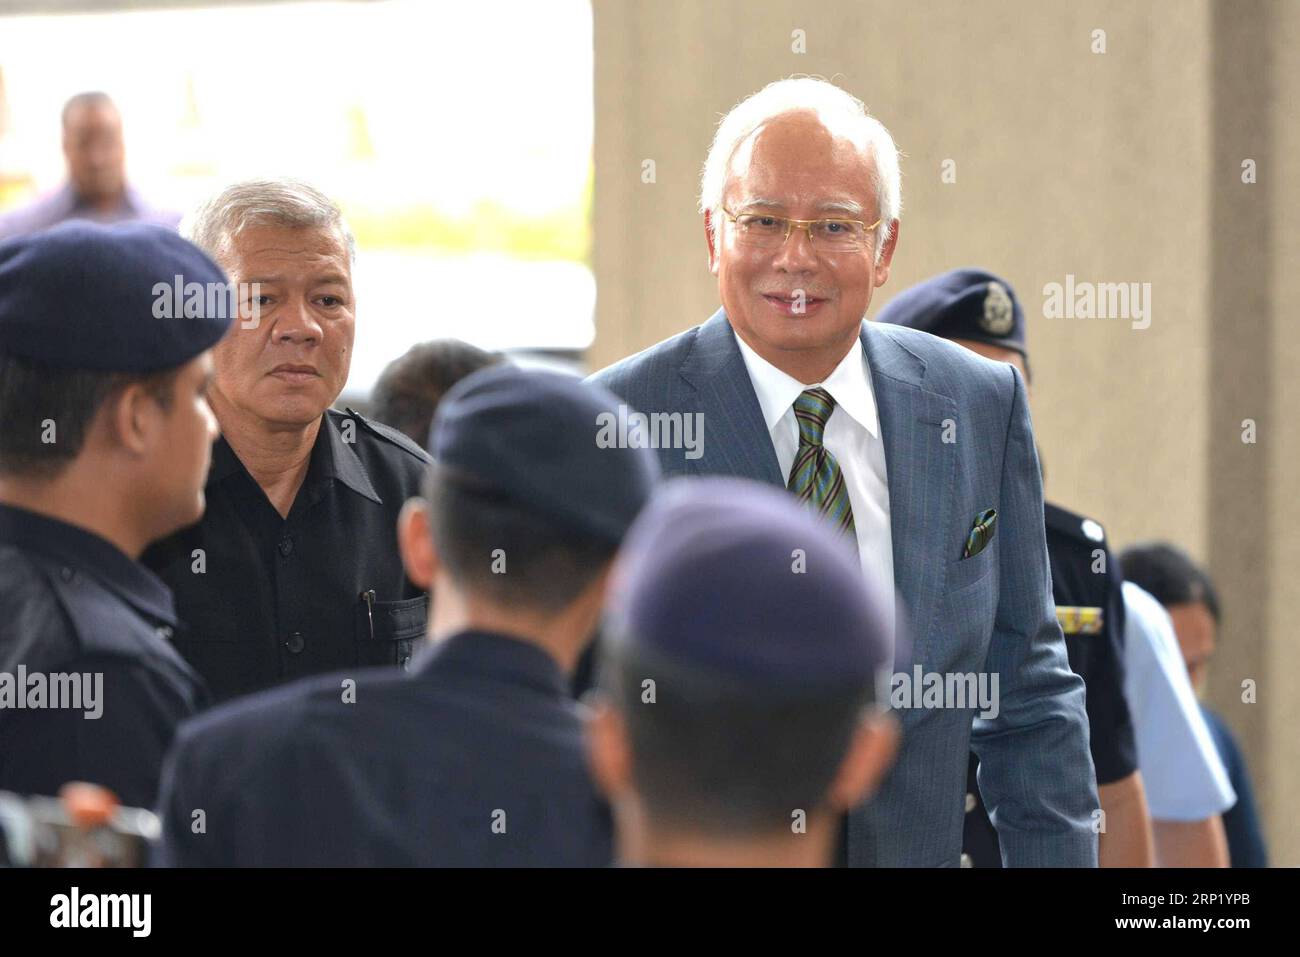 (180808) -- KUALA LUMPUR, Aug. 8, 2018 -- Former Malaysian Prime Minister Najib Razak appears at the Kuala Lumpur Courts complex in Kuala Lumpur in Malaysia, Aug. 8, 2018. Former Malaysian Prime Minister Najib Razak on Wednesday was charged with three offenses related to money-laundering and anti-terrorism financing, in addition to several counts of criminal breach of trust and corruption charges that were served in early July. ) (lrz) MALAYSIA-KUALA LUMPUR-NAJIB-CHARGES ChongxVoonxChung PUBLICATIONxNOTxINxCHN Stock Photo